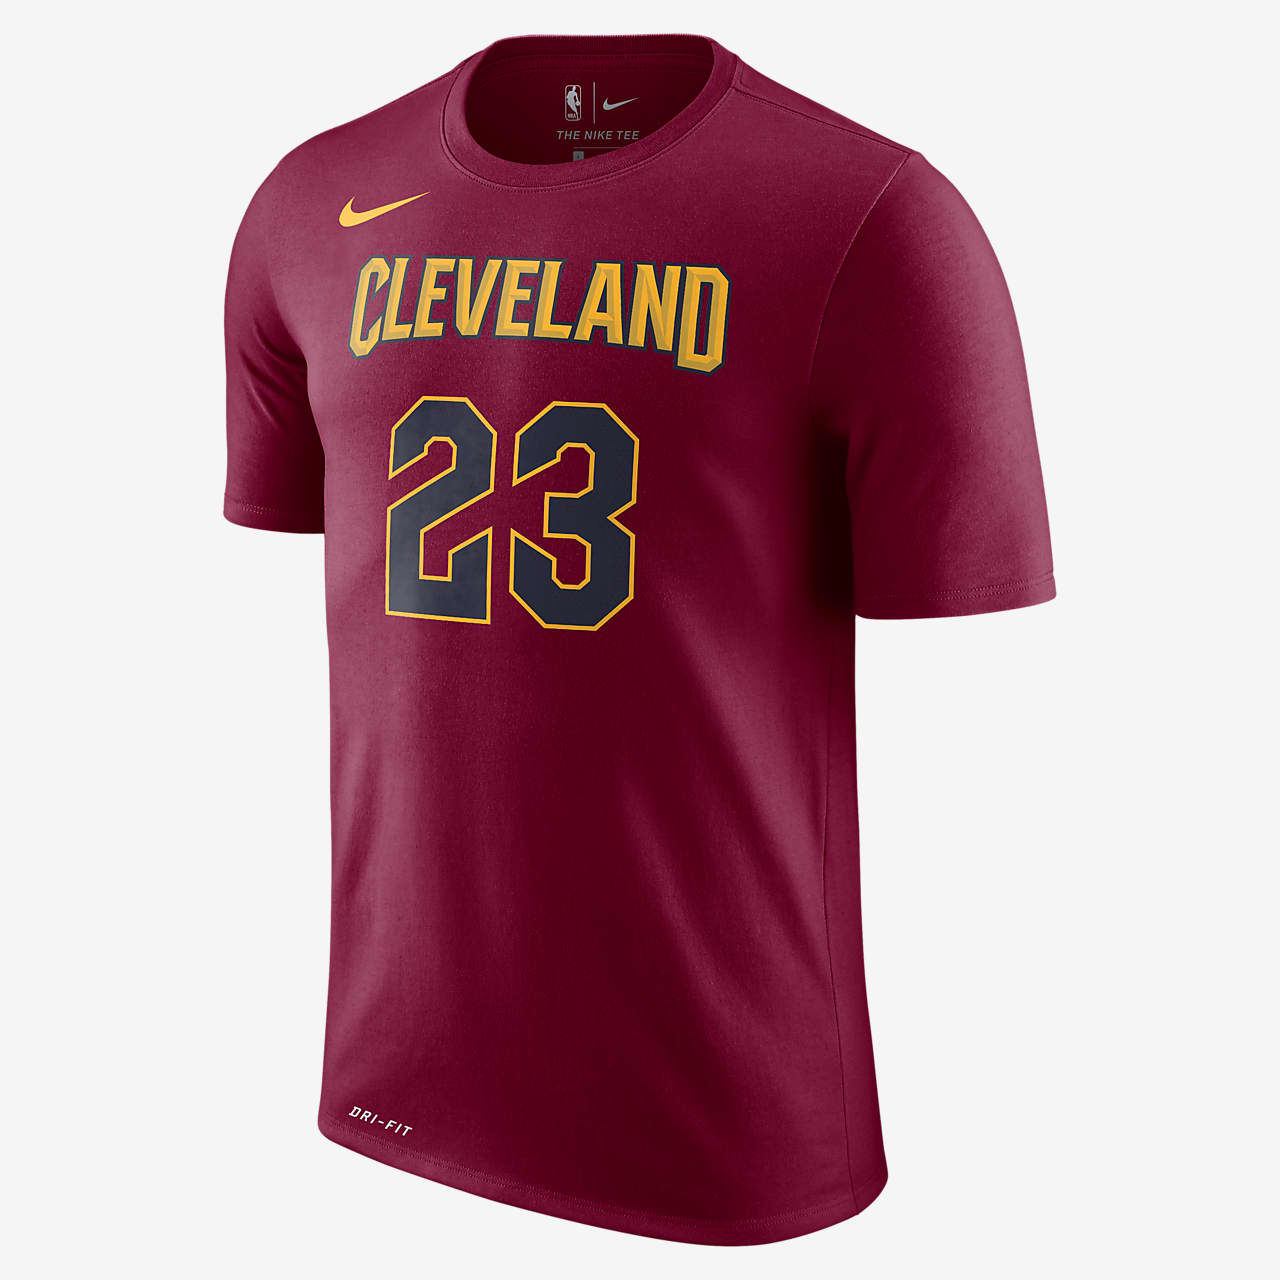 new cleveland cavaliers nike jersey